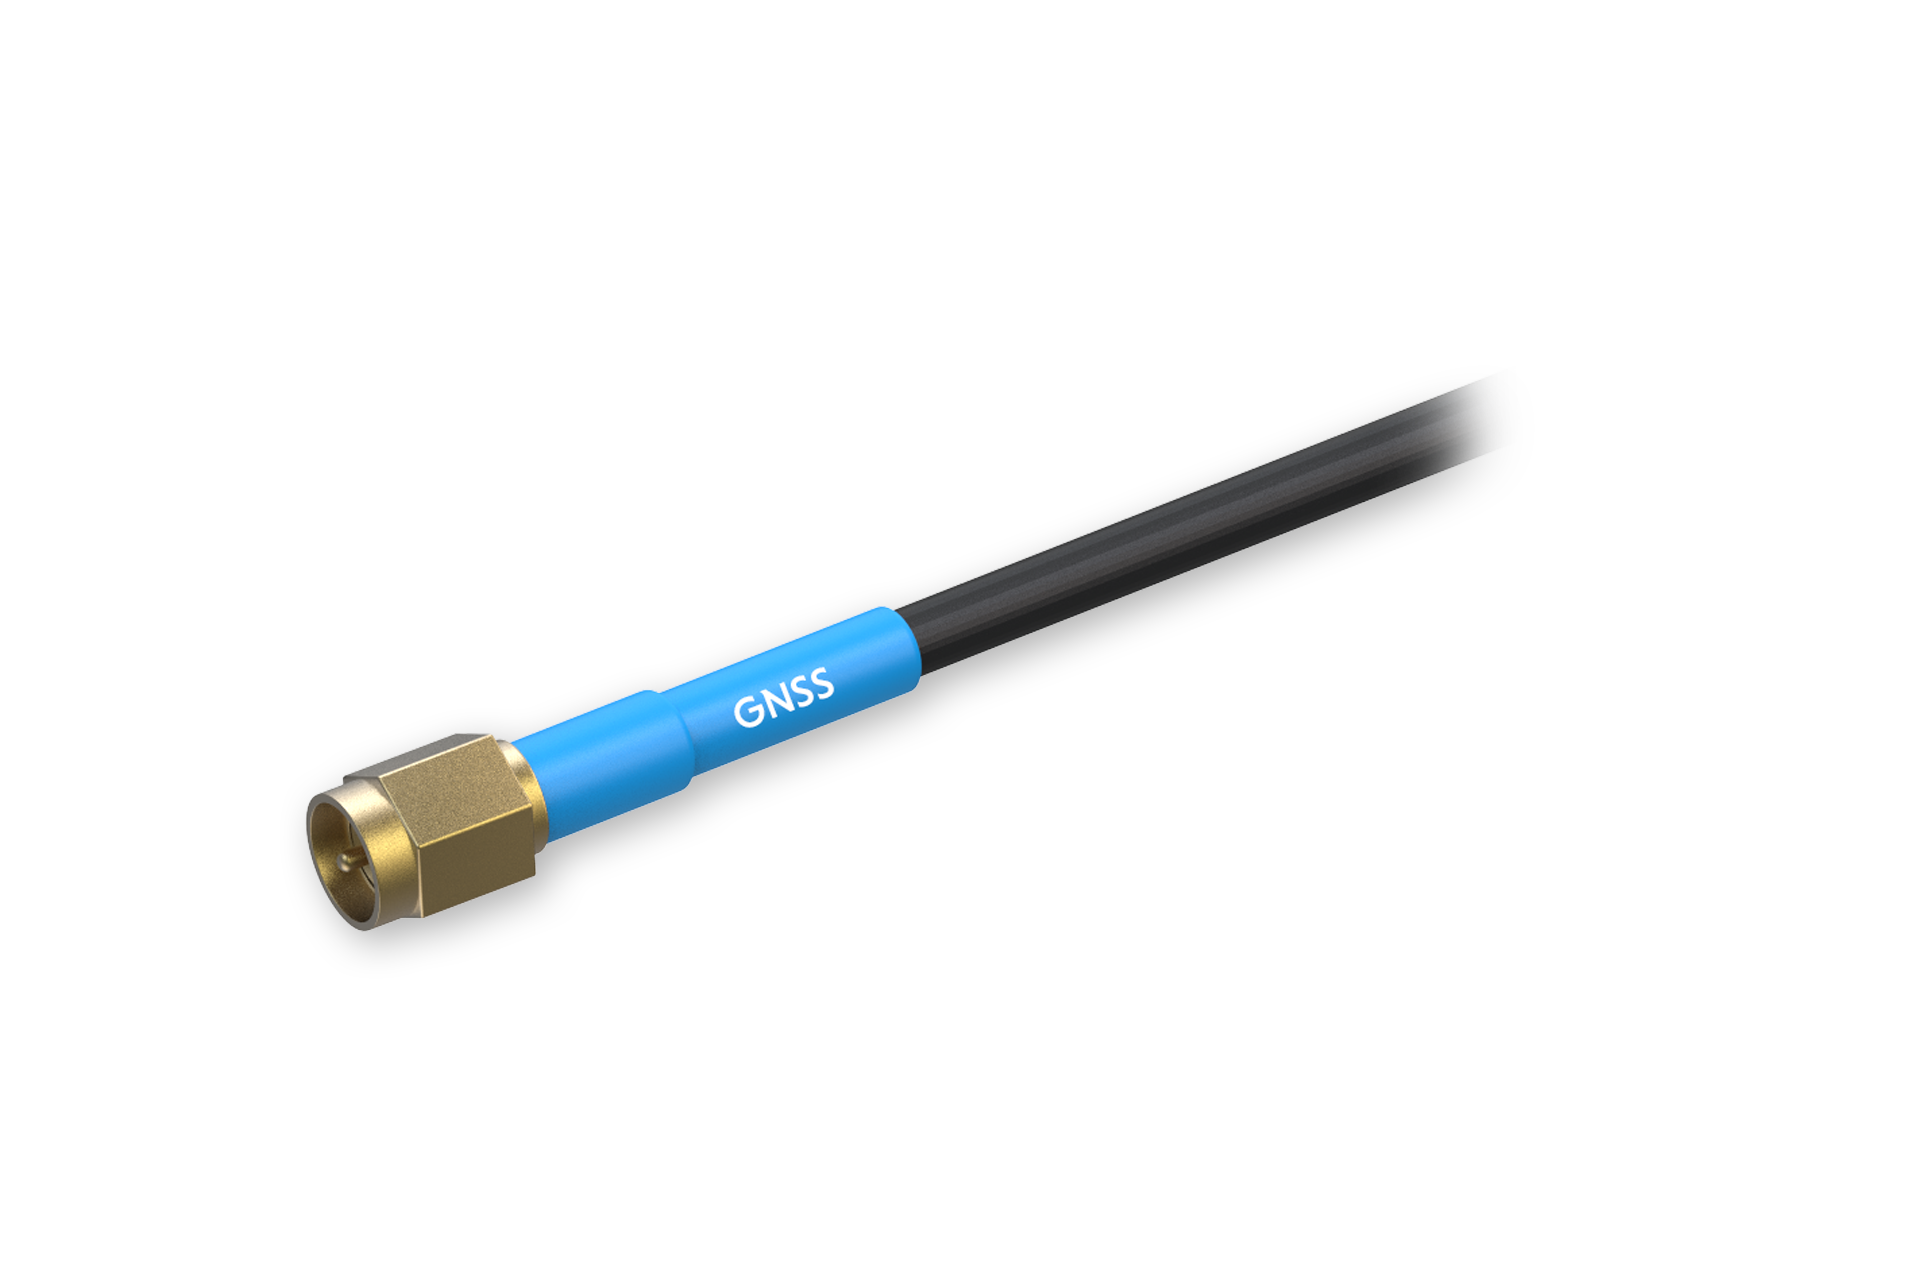 586458-gnss-adhesive-sma-antenna-x1.png